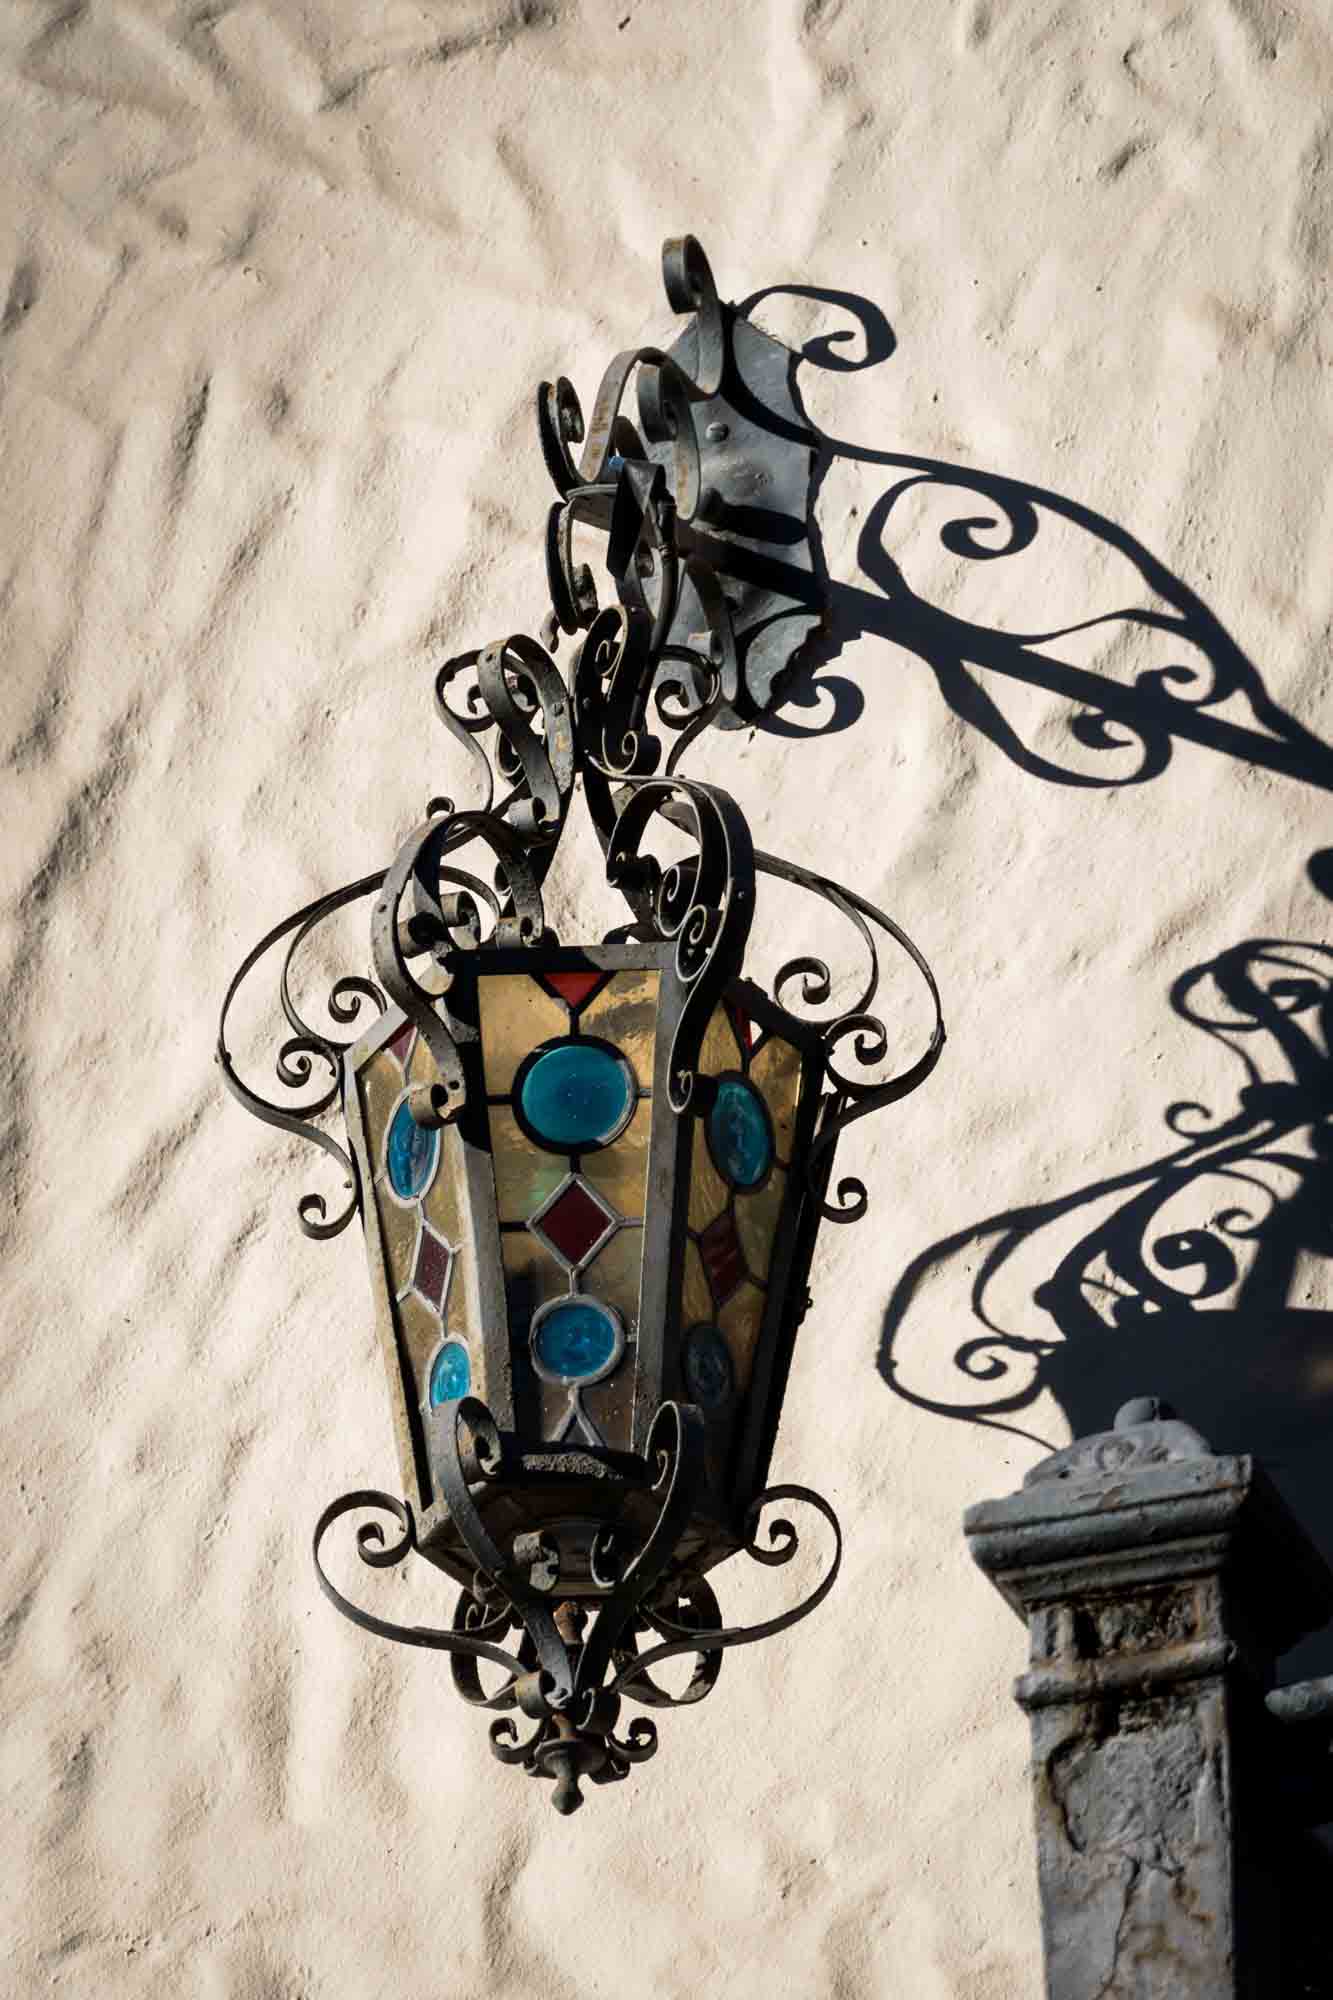 Intricate wrought iron lantern with colorful glass for an article on how to take photos at the McNay Art Museum